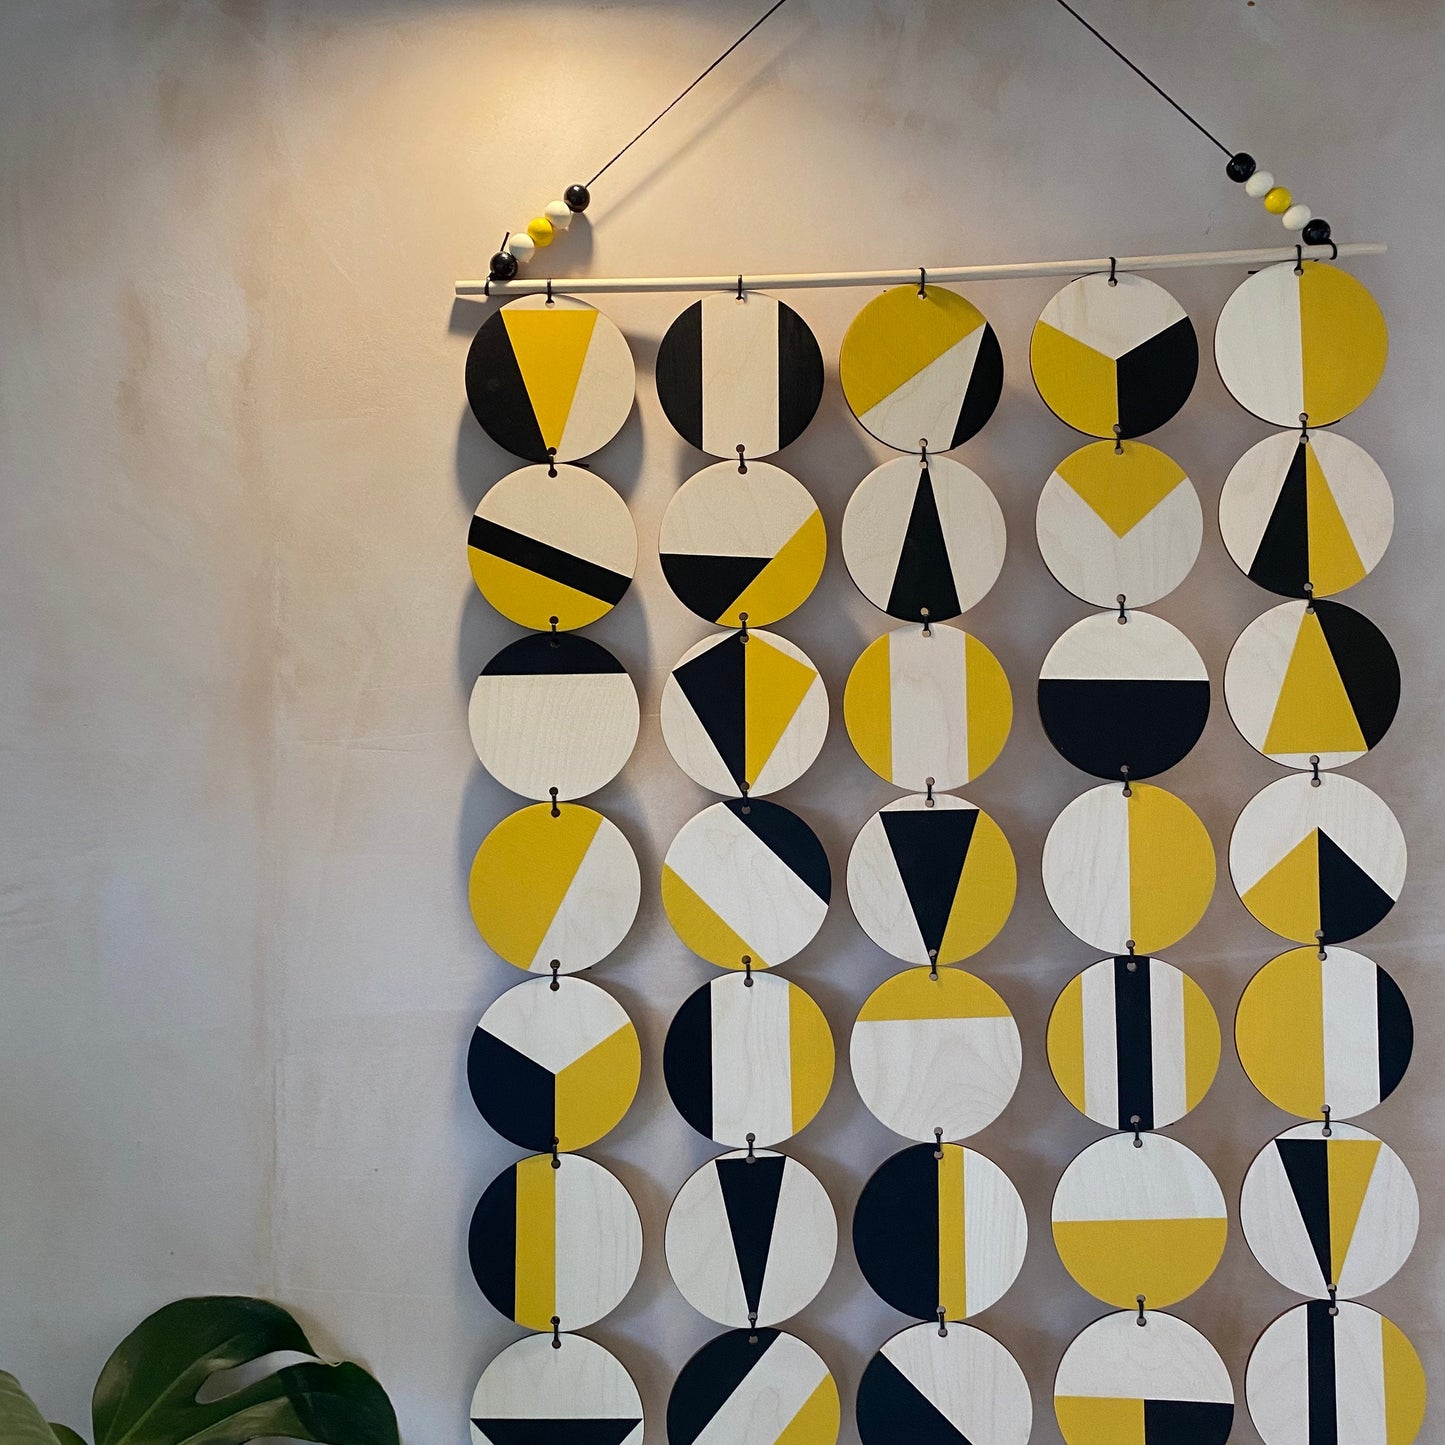 Black and Yellow Wall Art - Large Decoration - Huge Geometric Art - Contemporary Wall Decoration - Home Wall Decor - Wall Tapestry